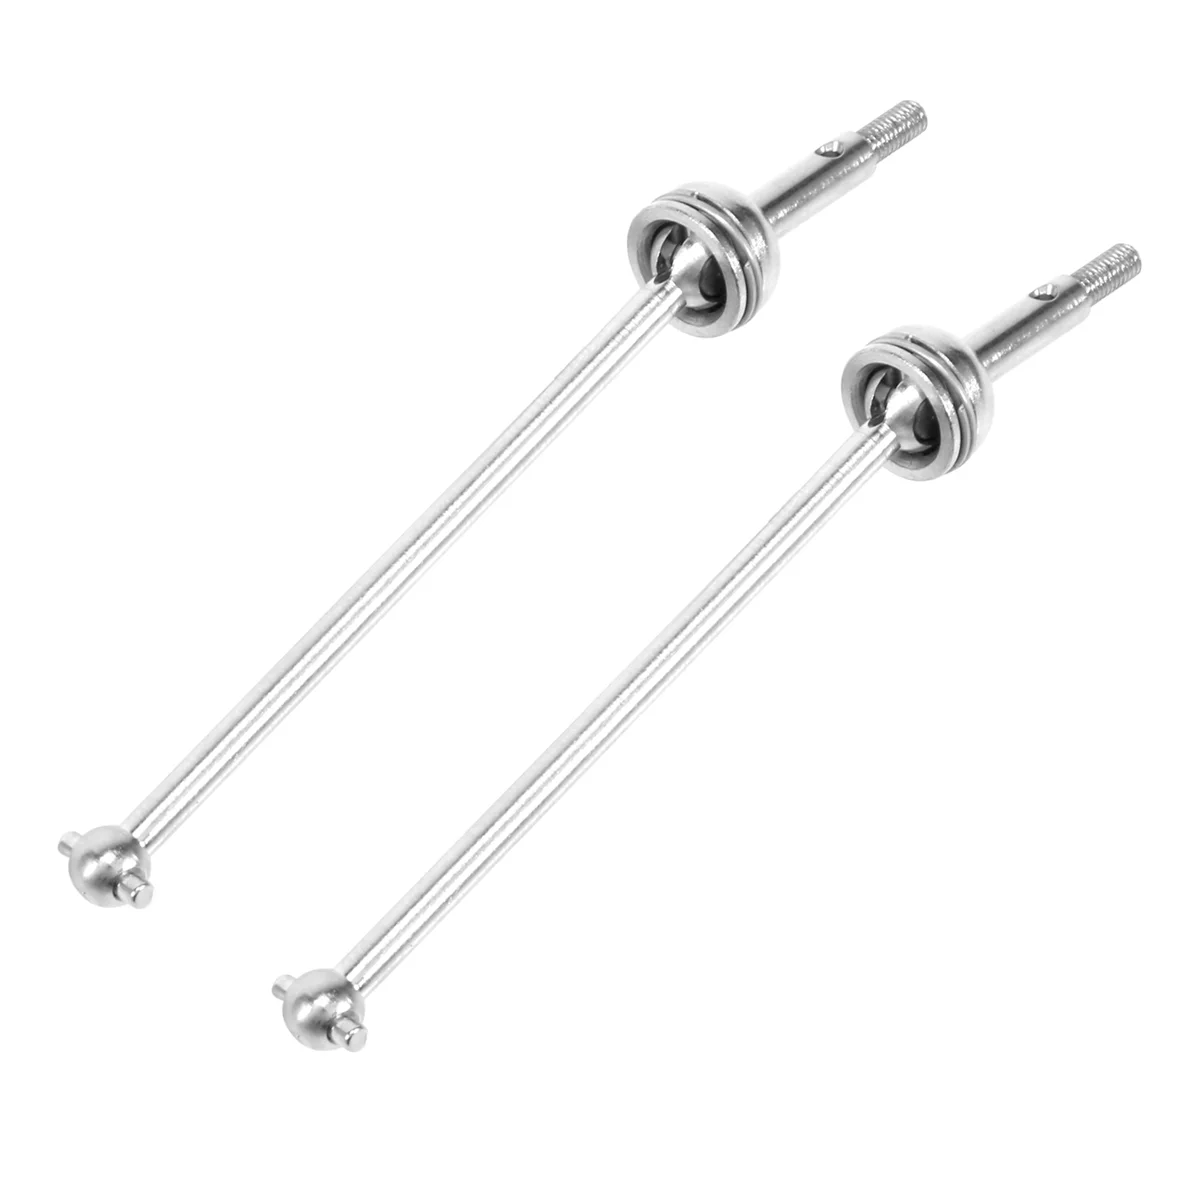 

2Pcs 45 Hardened Steel CVD Drive Shaft for Wltoys 144001 124019 LC Racing 1/14 RC Drift Car Upgrade Parts,B